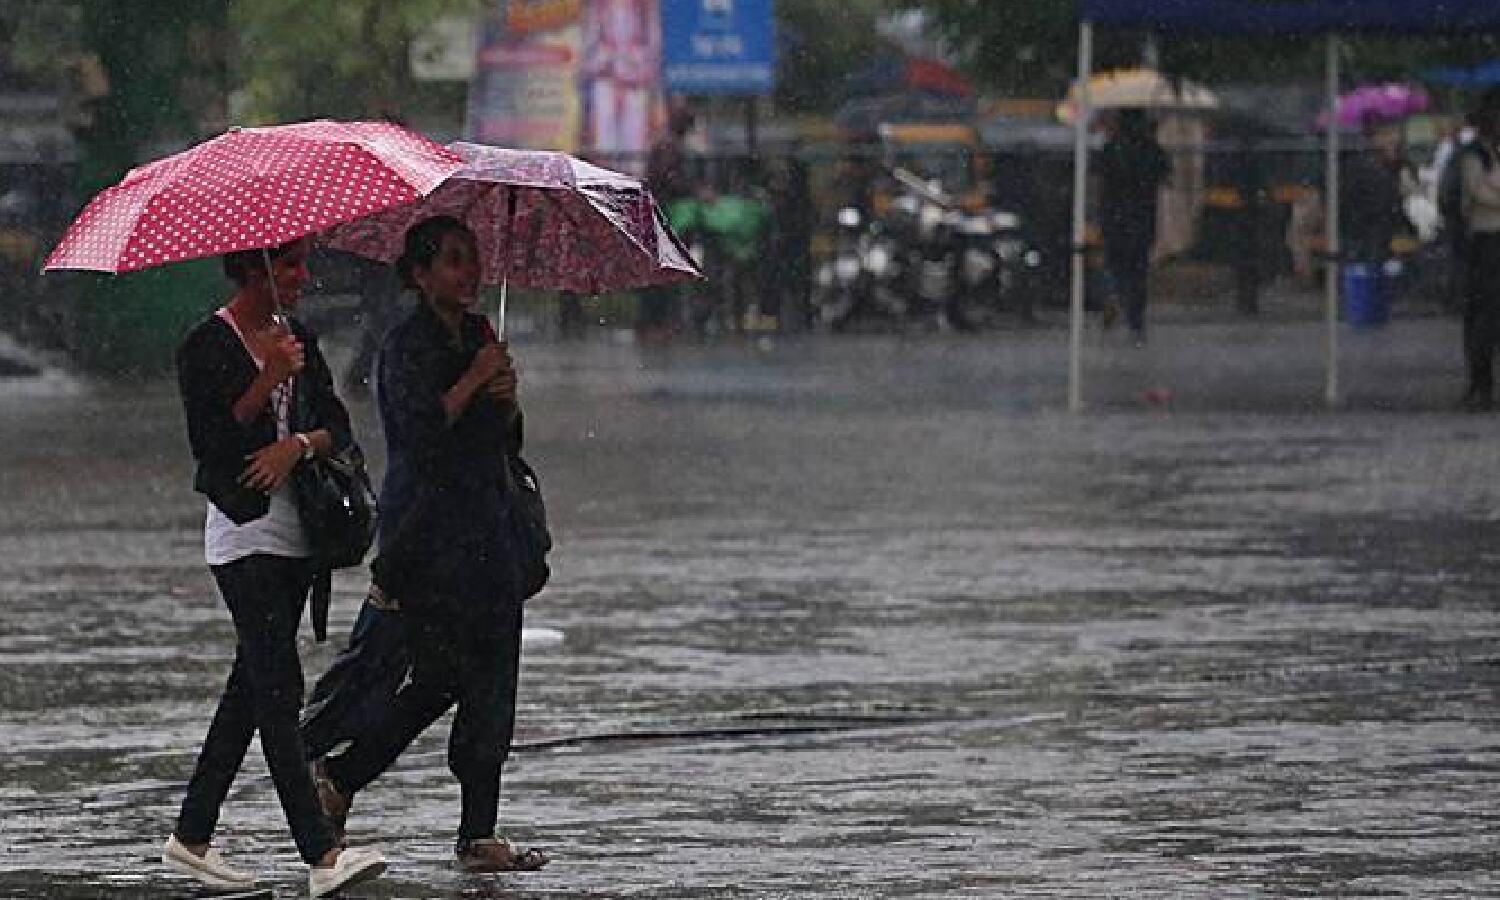 Weather Today: Heavy rain expected in Kerala even today, know the condition of other states including UP